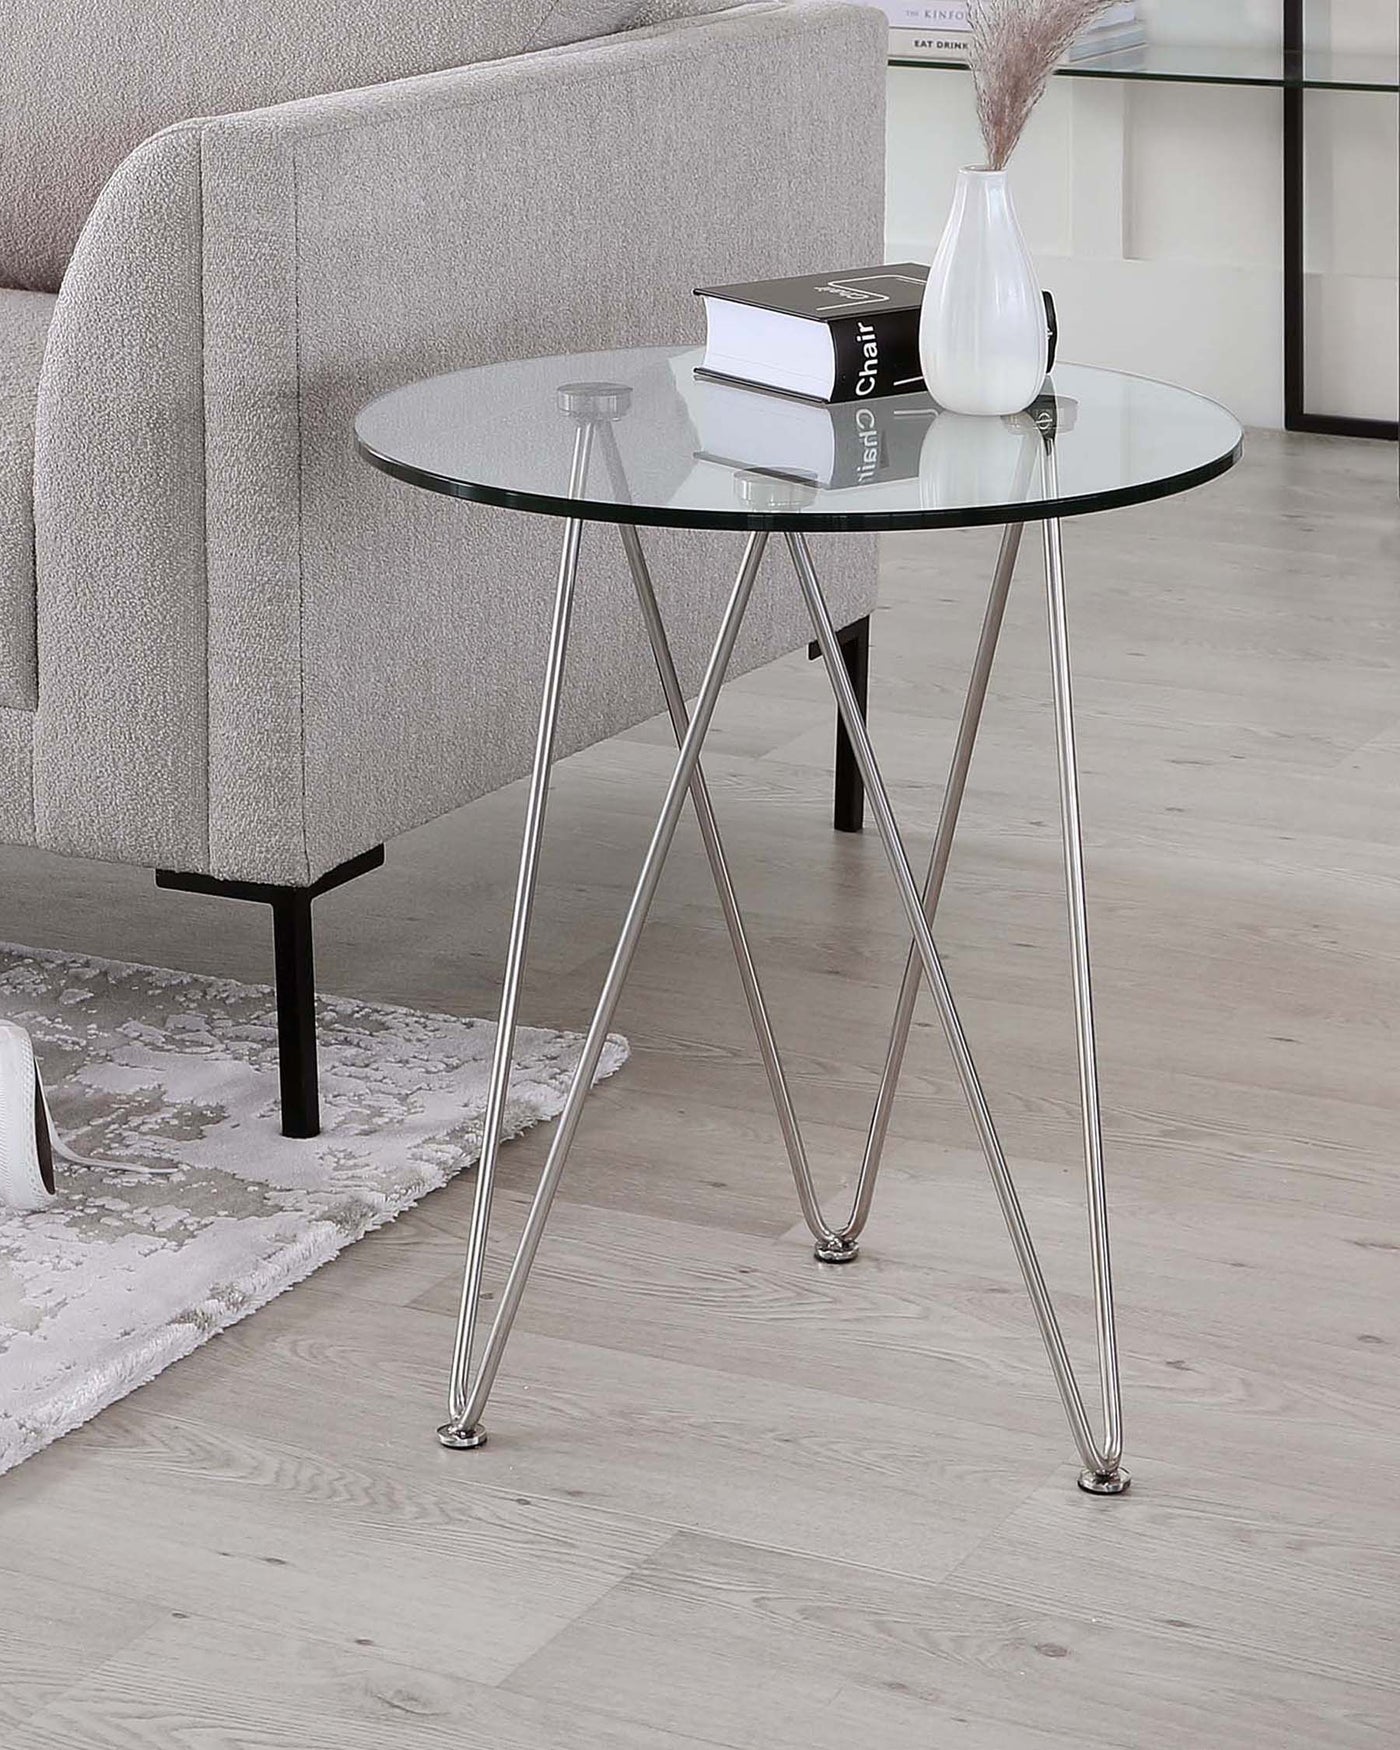 Ripple Glass Side Table With Stainless Steel Legs